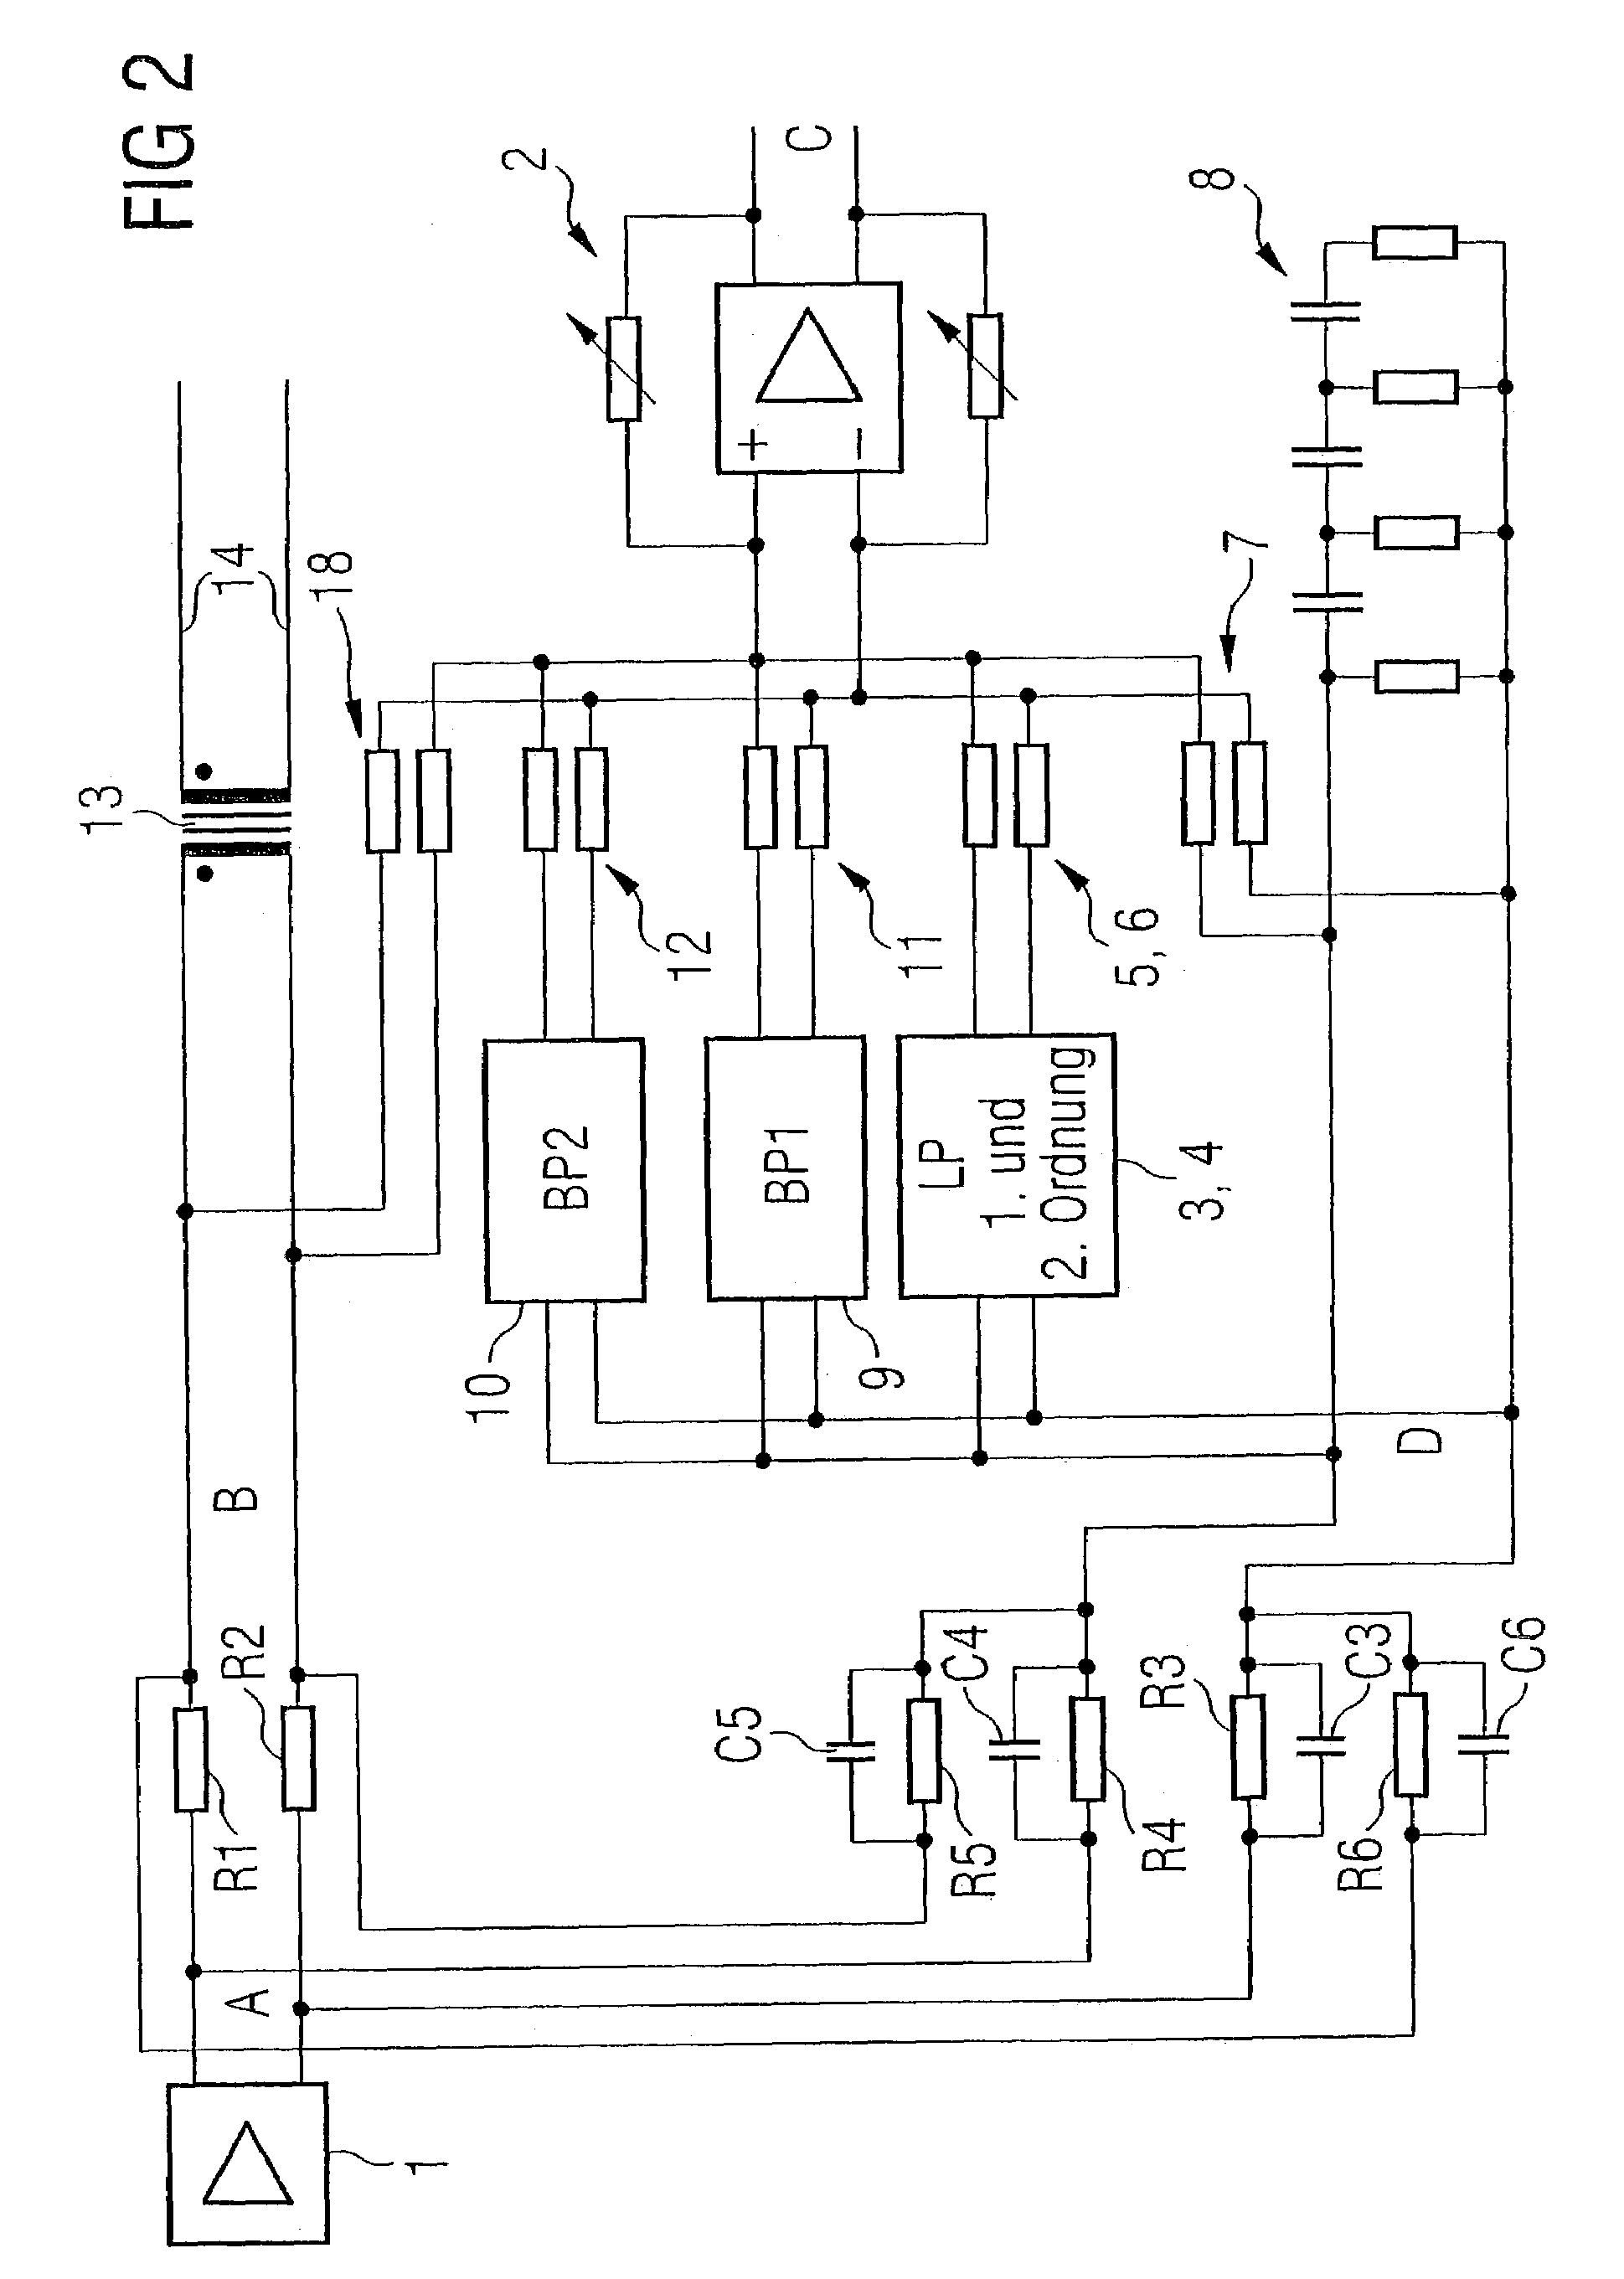 Circuit arrangement for the analogue suppression of echoes